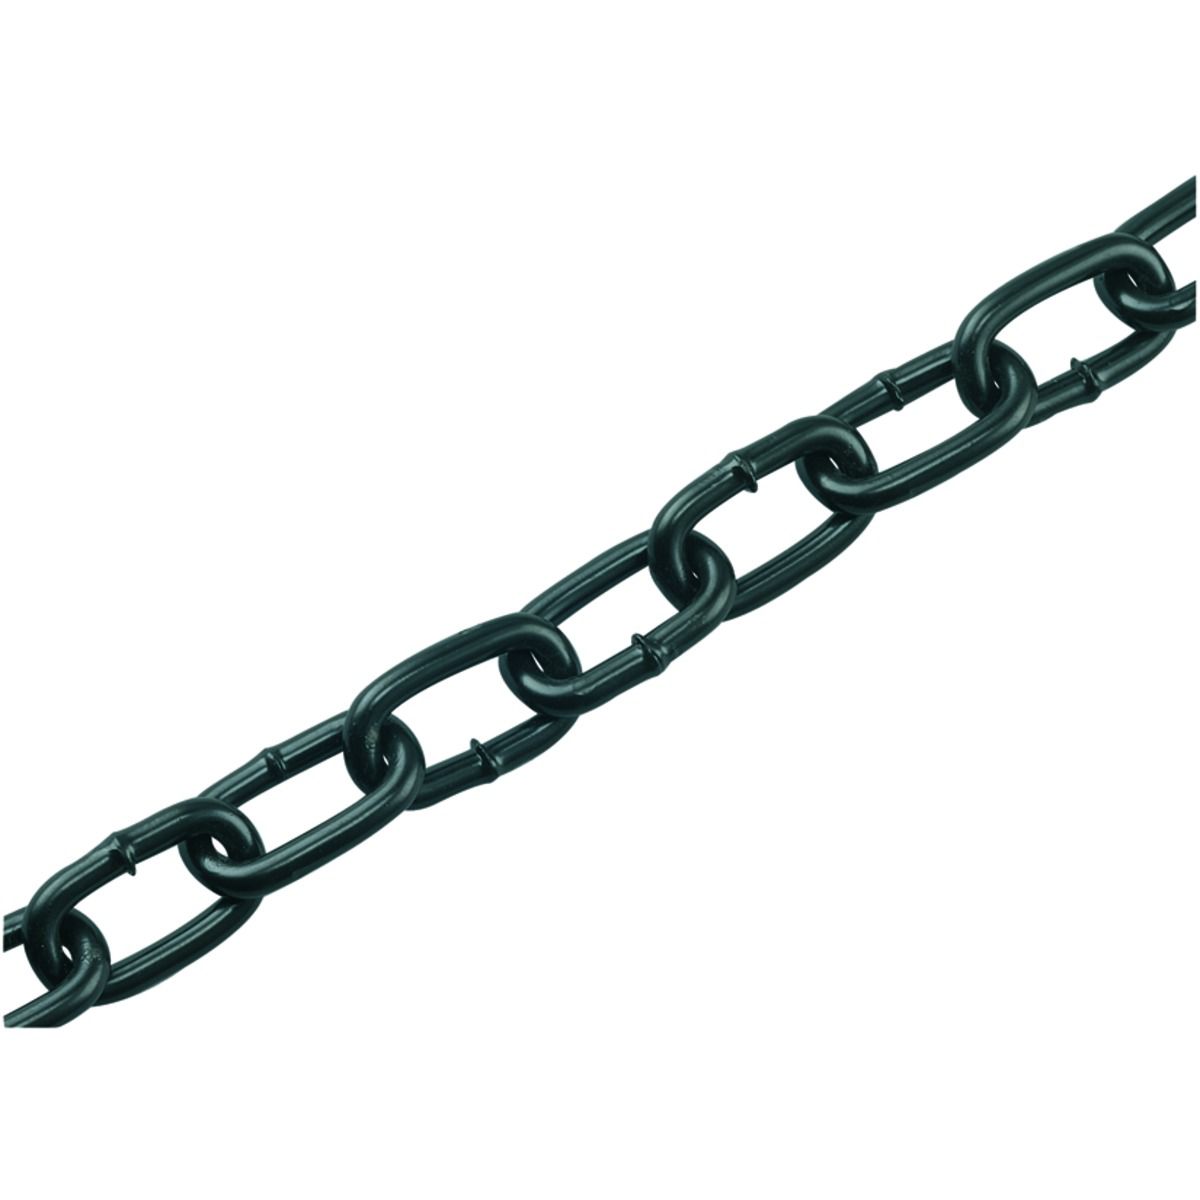 Image of Wickes Black Zinc Plated Steel Welded Chain - 4 x 19mm x 2m